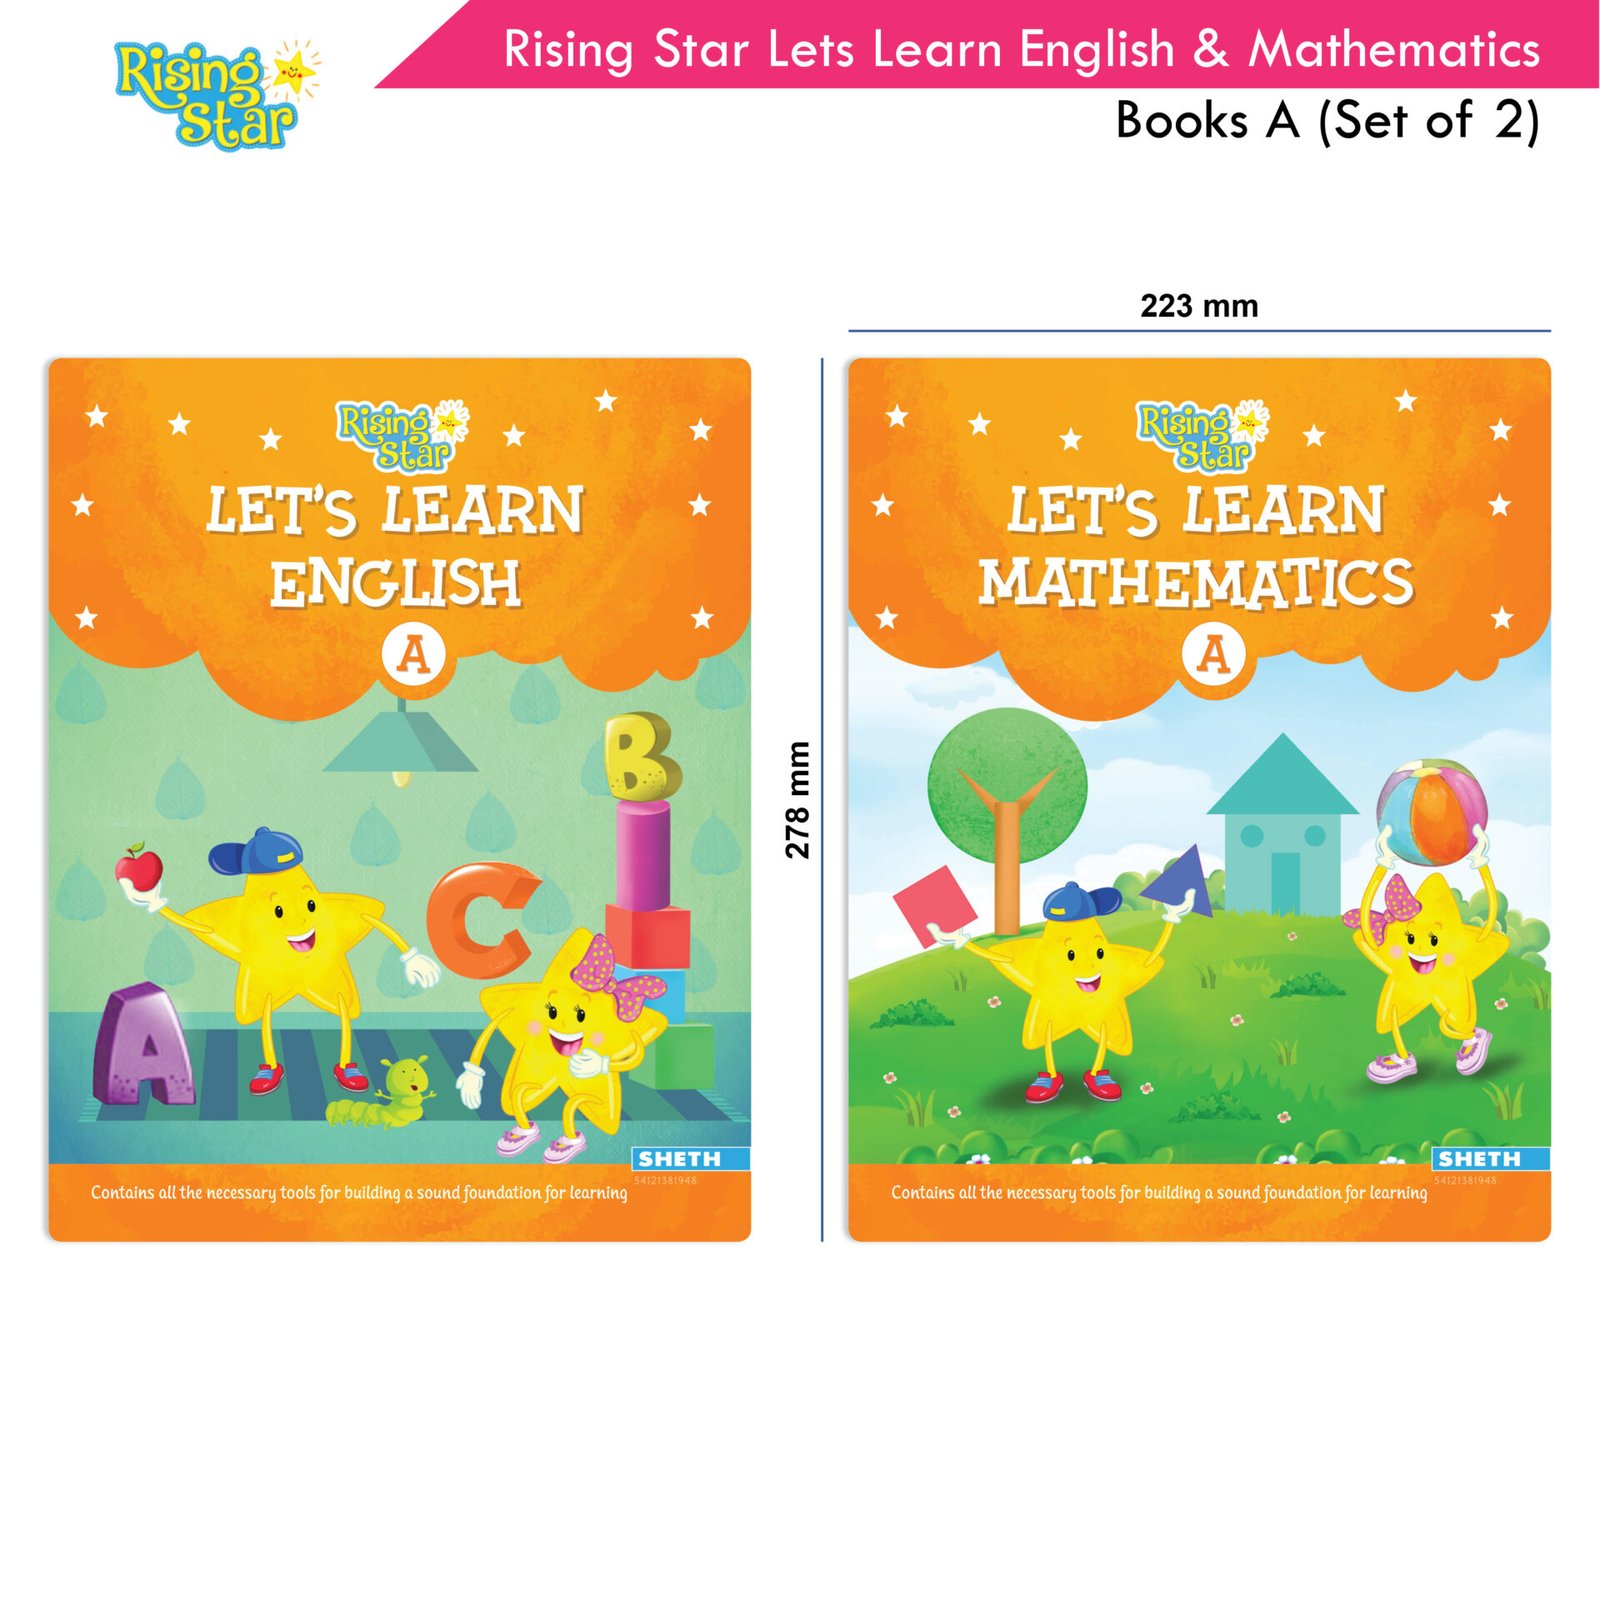 Rising Star Lets Learn English and Mathematics Books A Set of 2 2